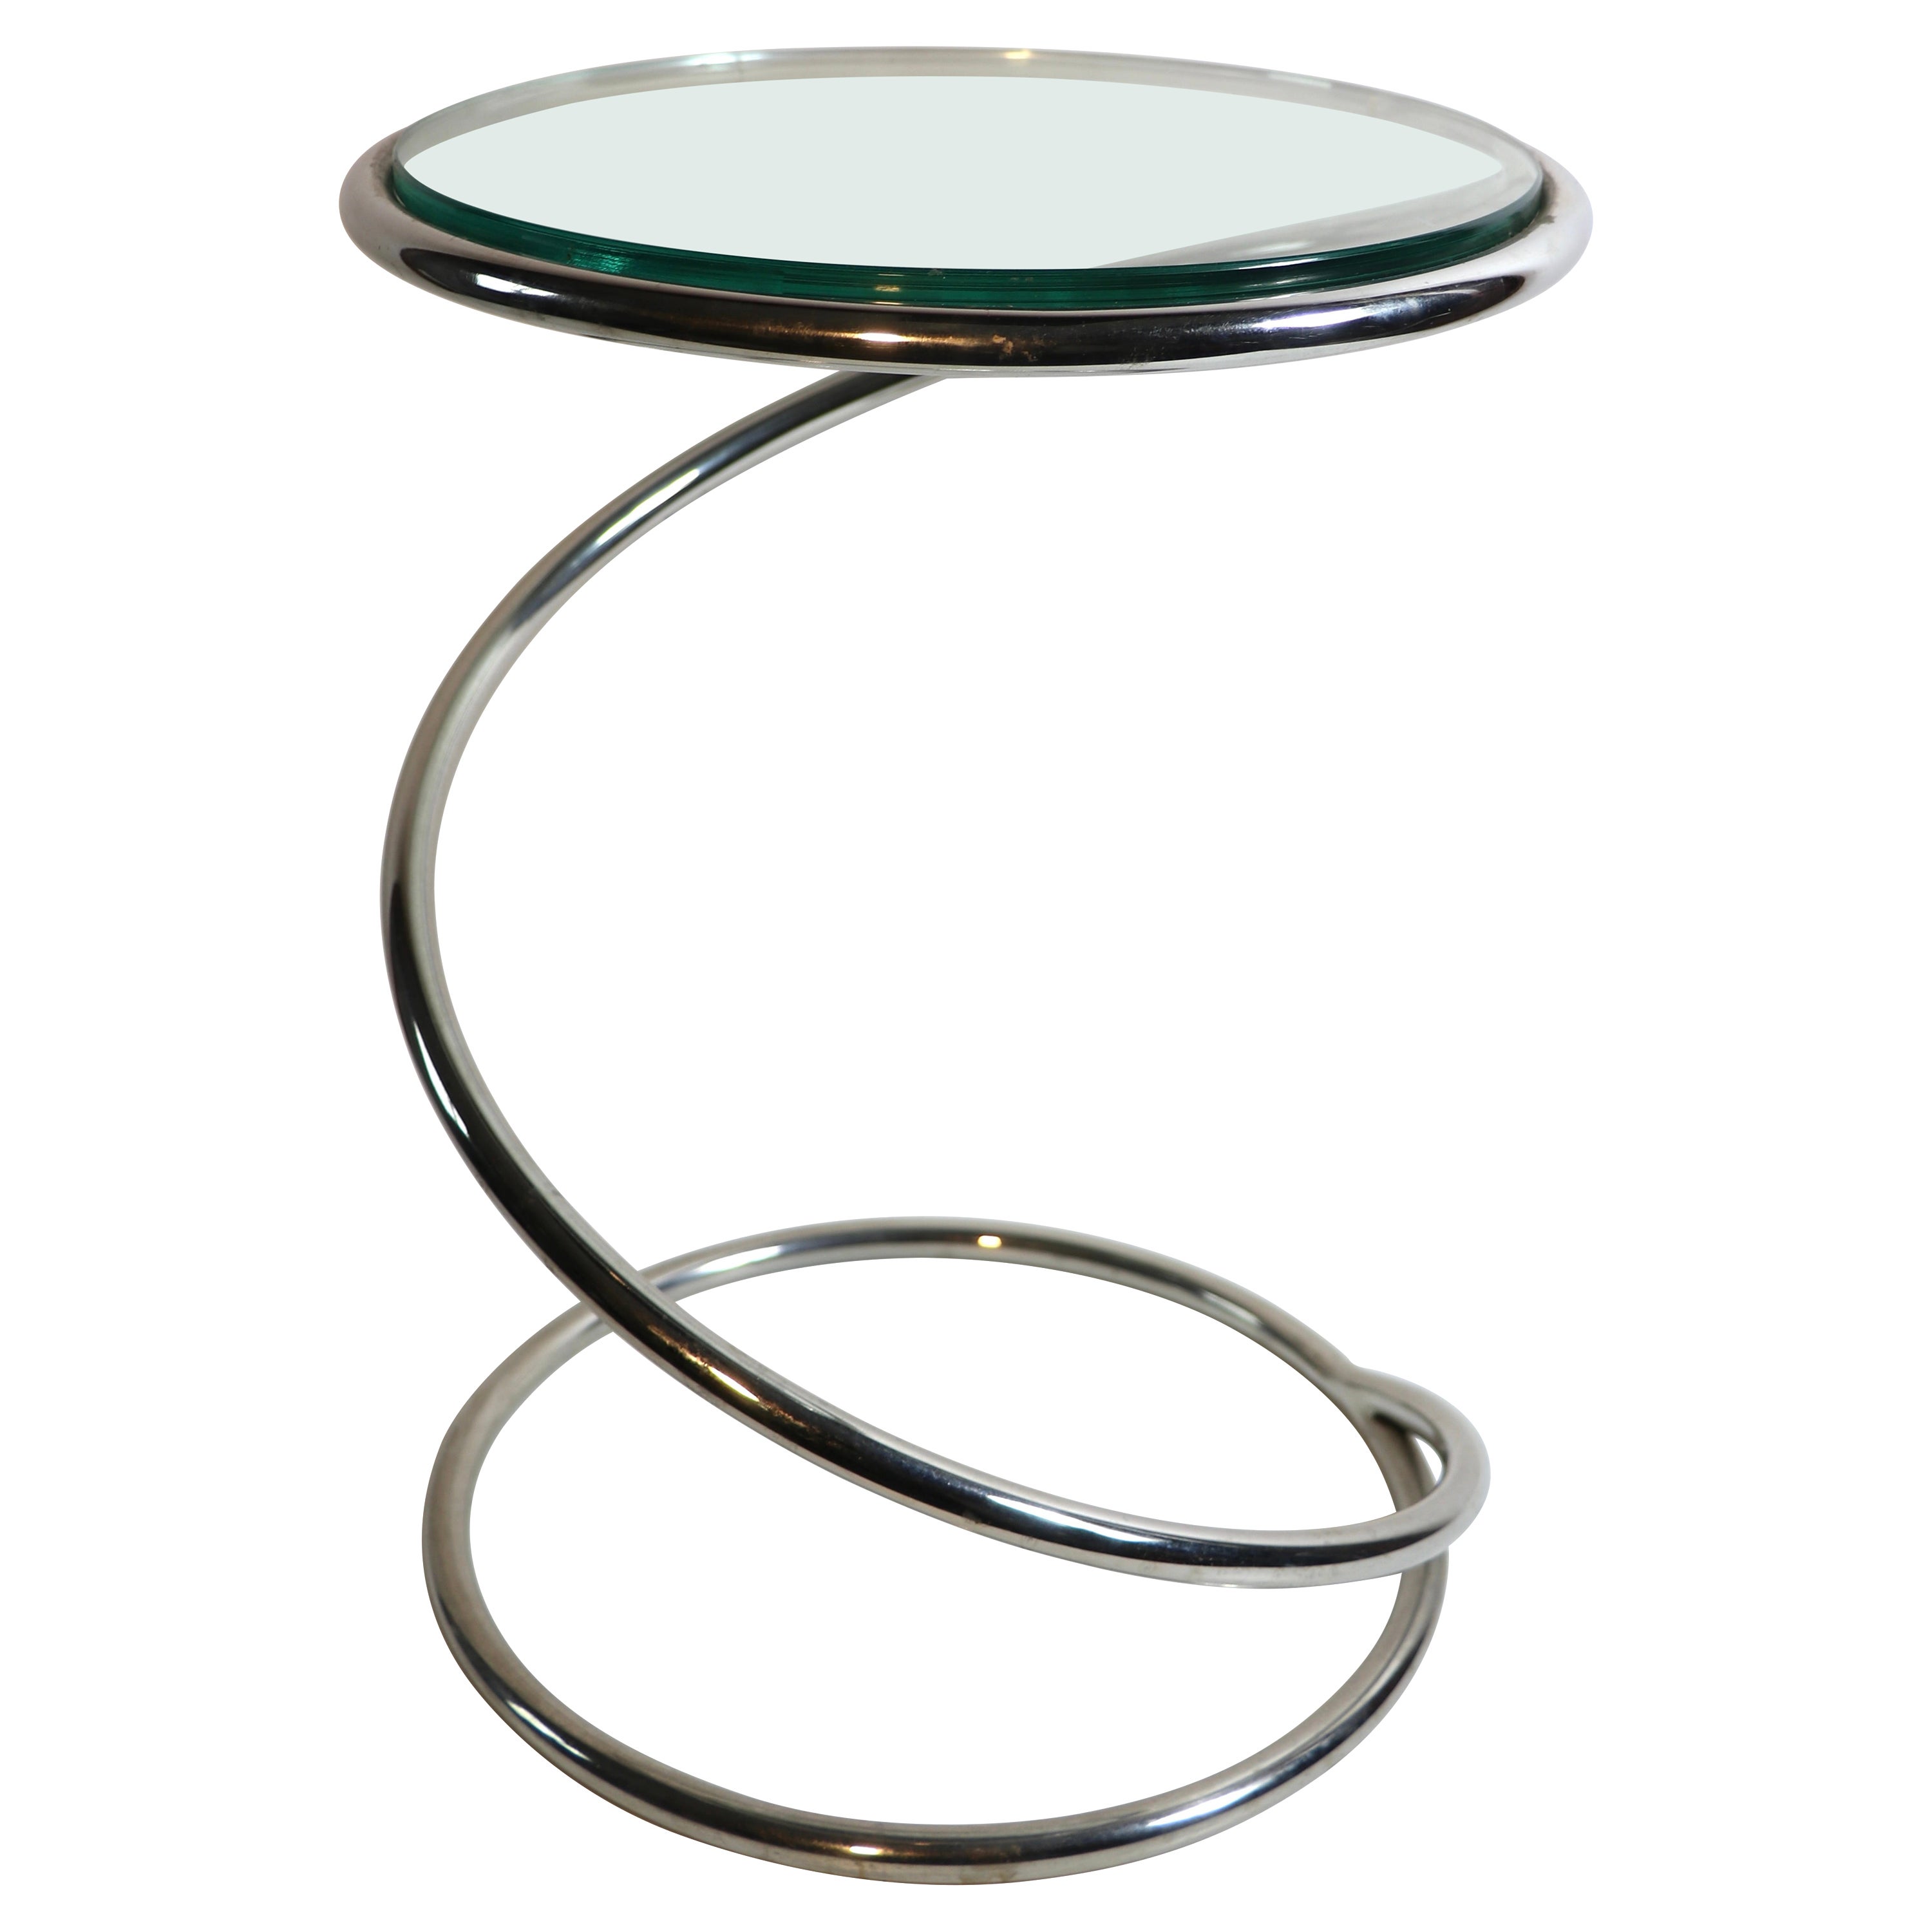 Chrome Spiral Coil Table by Pace For Sale